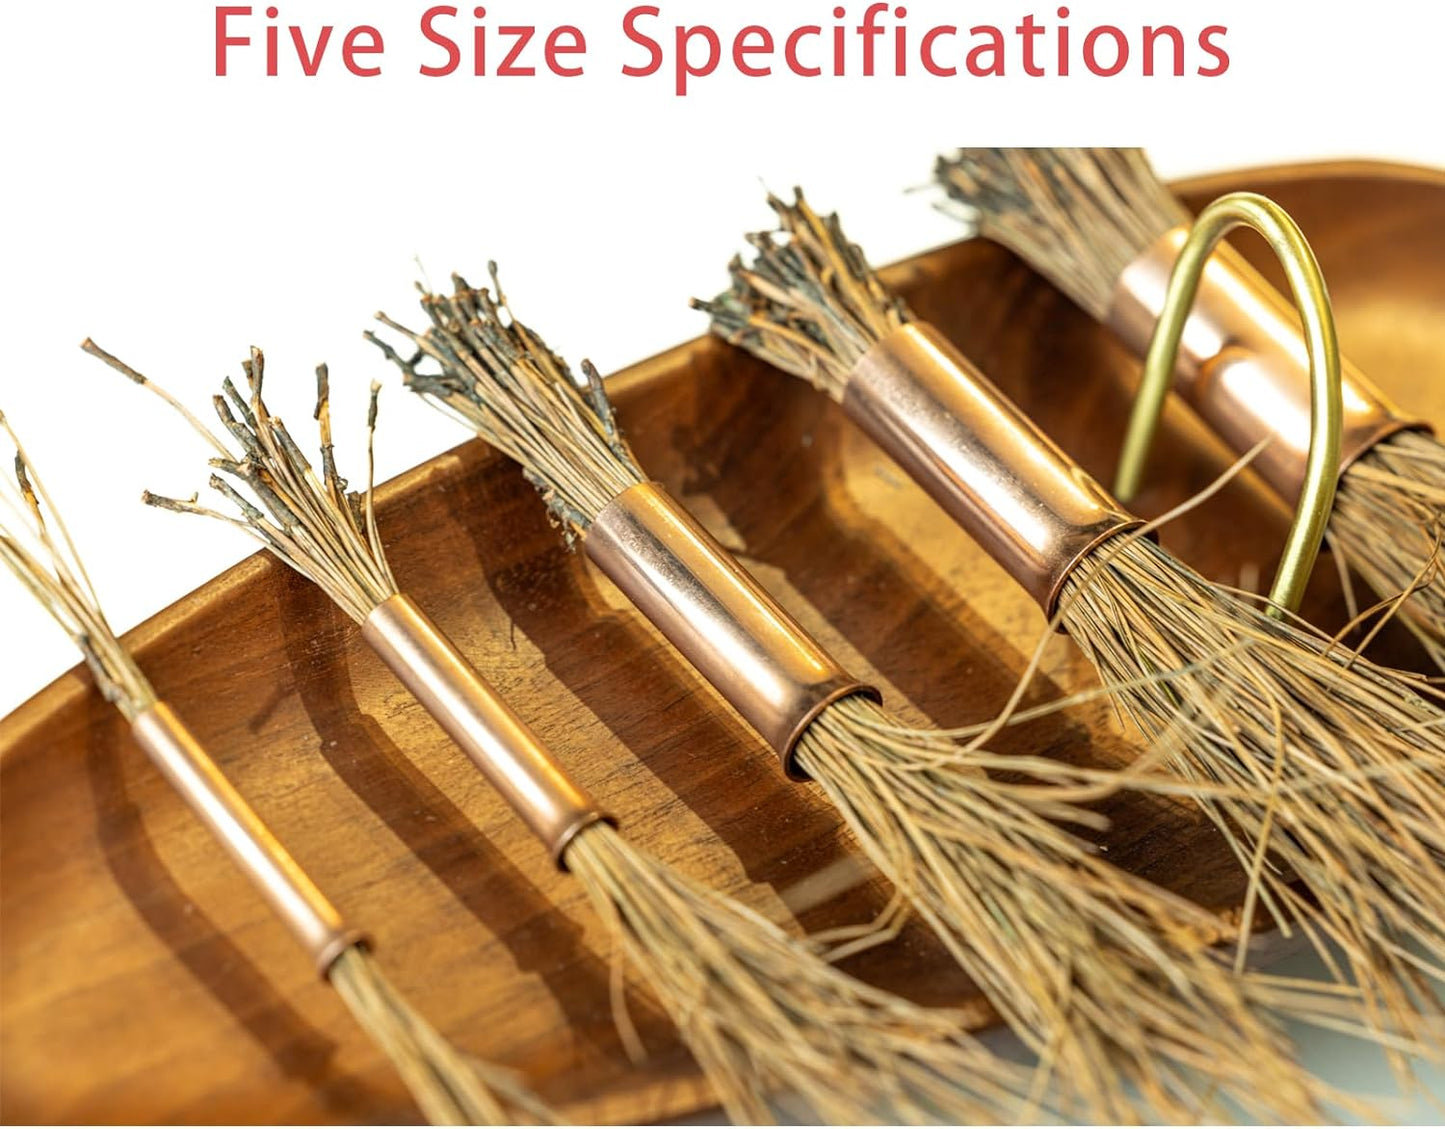 5 Pack Longer Pine Needle Coiling Tool, Gauge for Basket Making, Copper Pine Needle Gauge Guide for Basket Making Weaving(Copper)